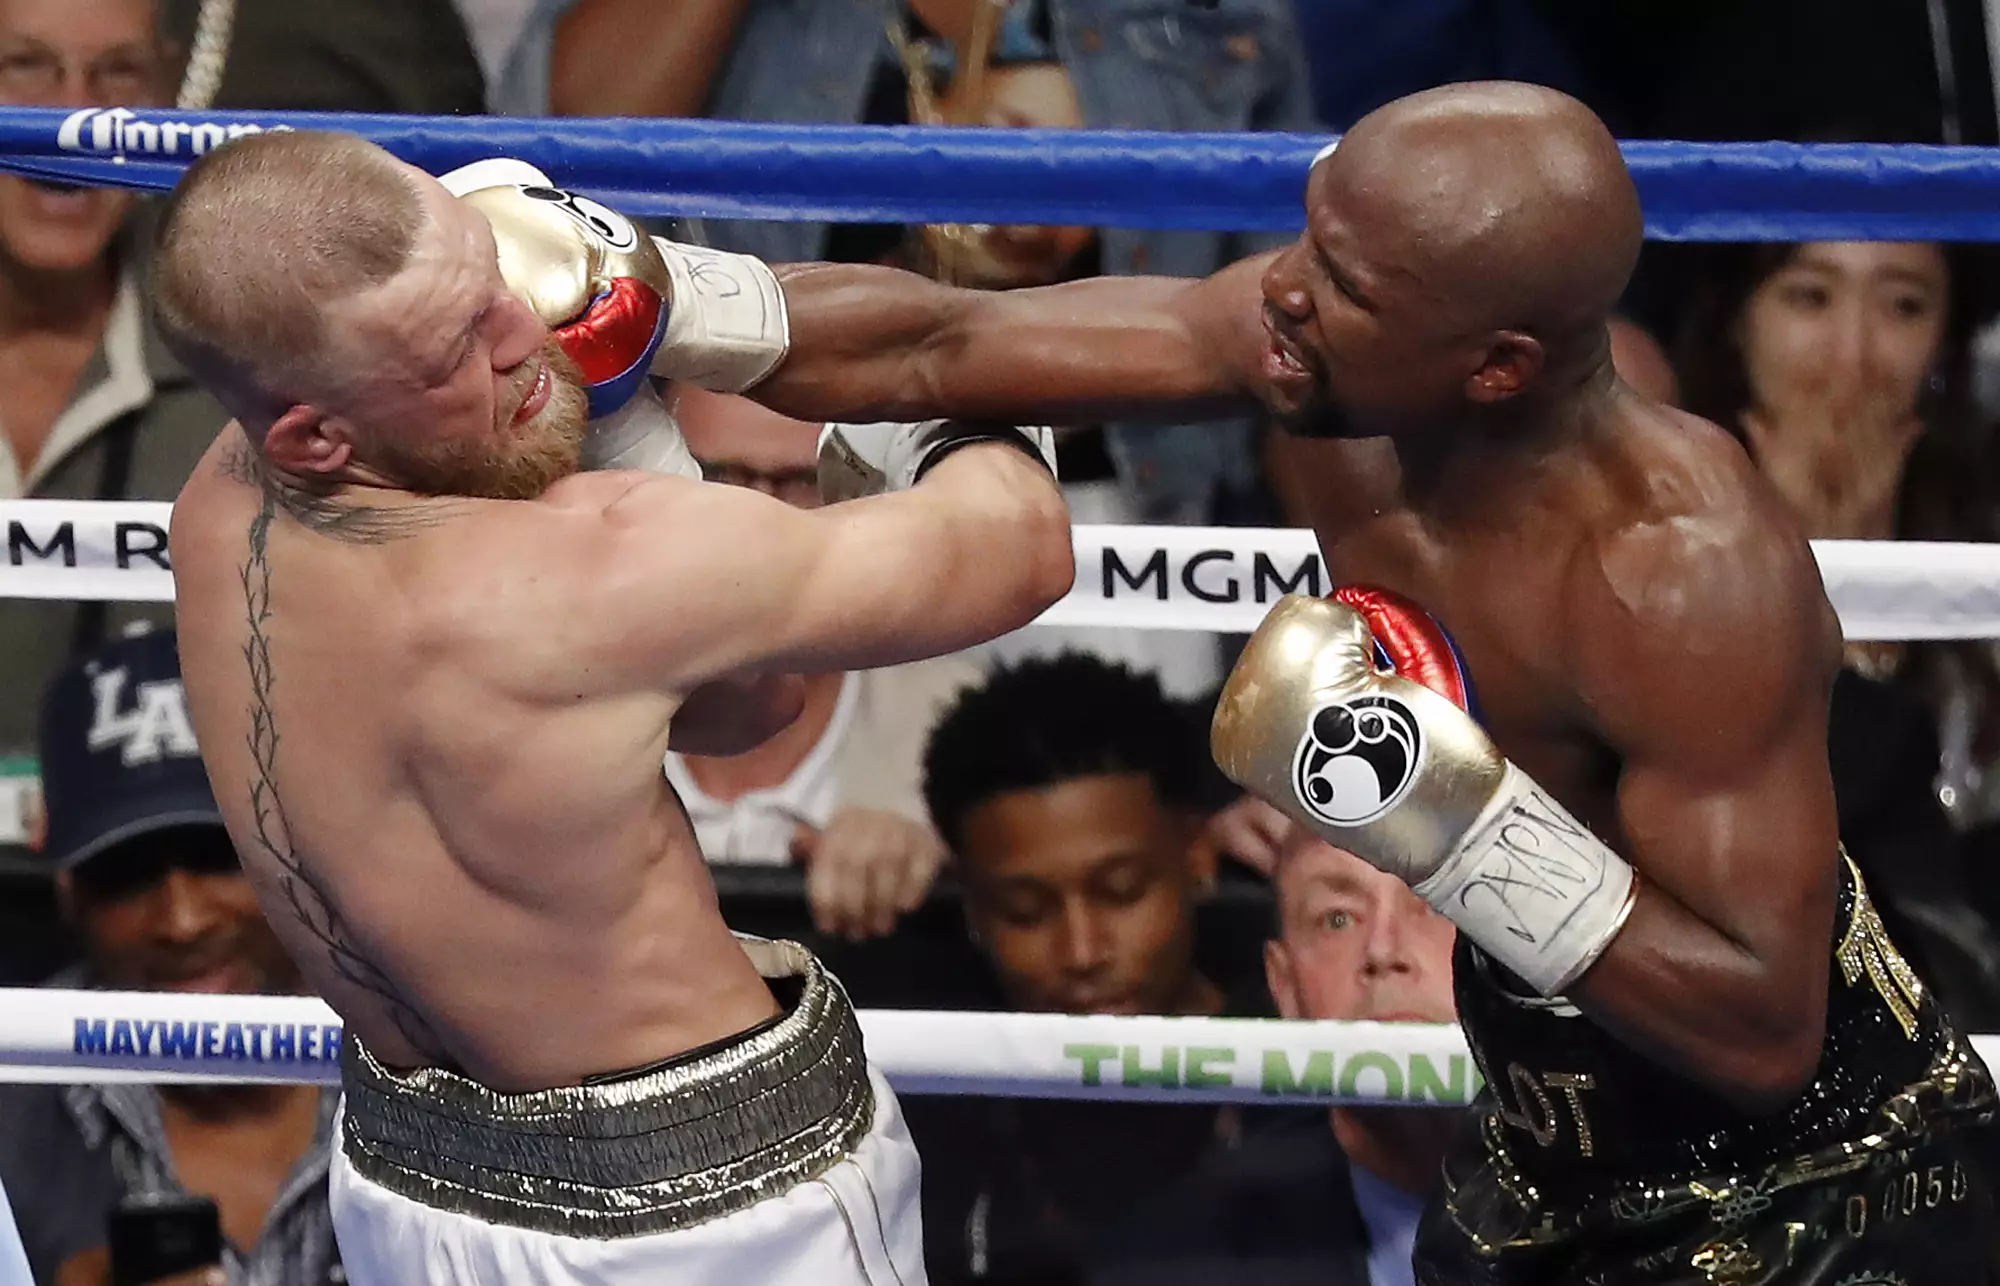 Mayweather was unsurprisingly dominant against McGregor. Image: PA Images